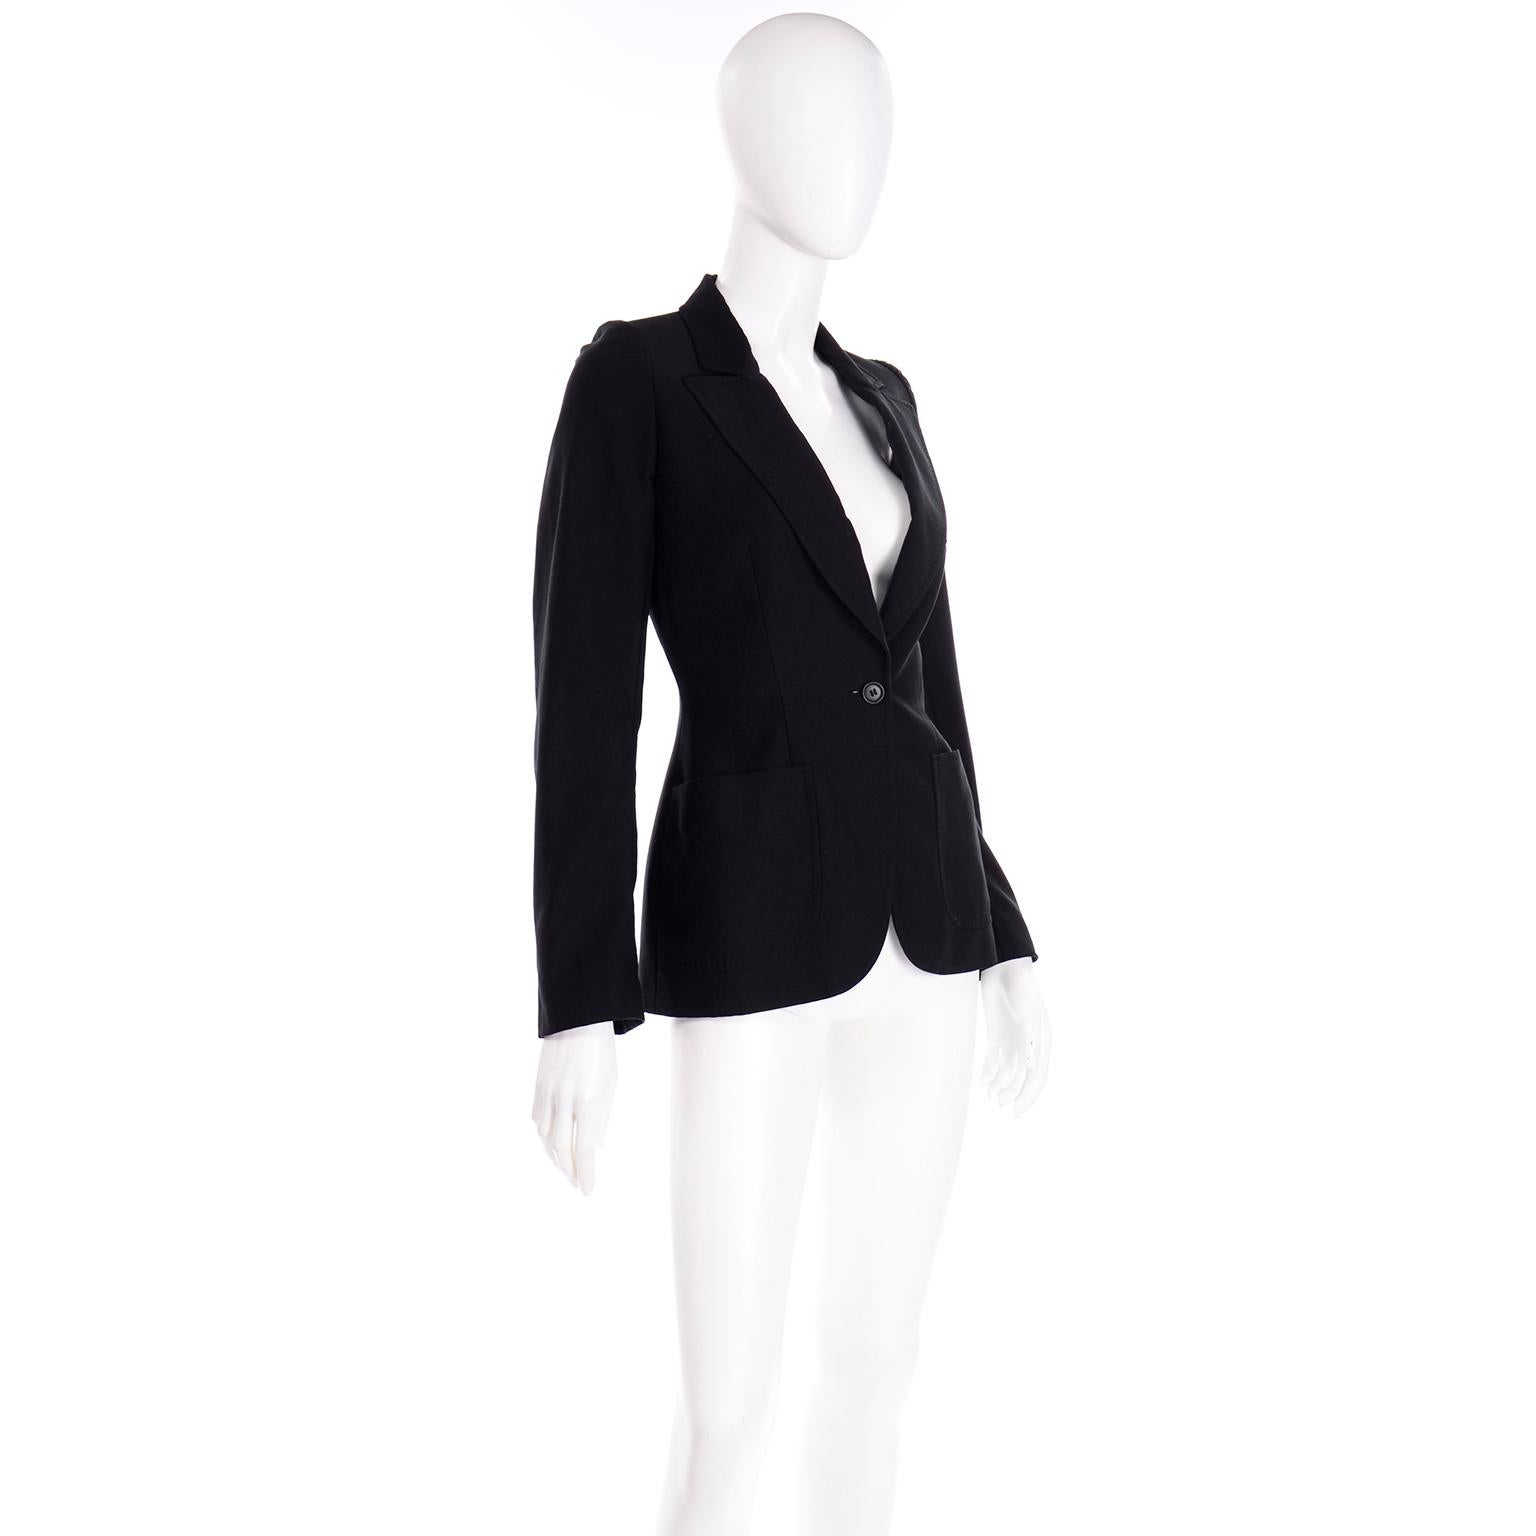 Alexander McQueen Fall 2000 Eshu Runway Black Blazer Jacket w Puff Sleeves In Excellent Condition For Sale In Portland, OR